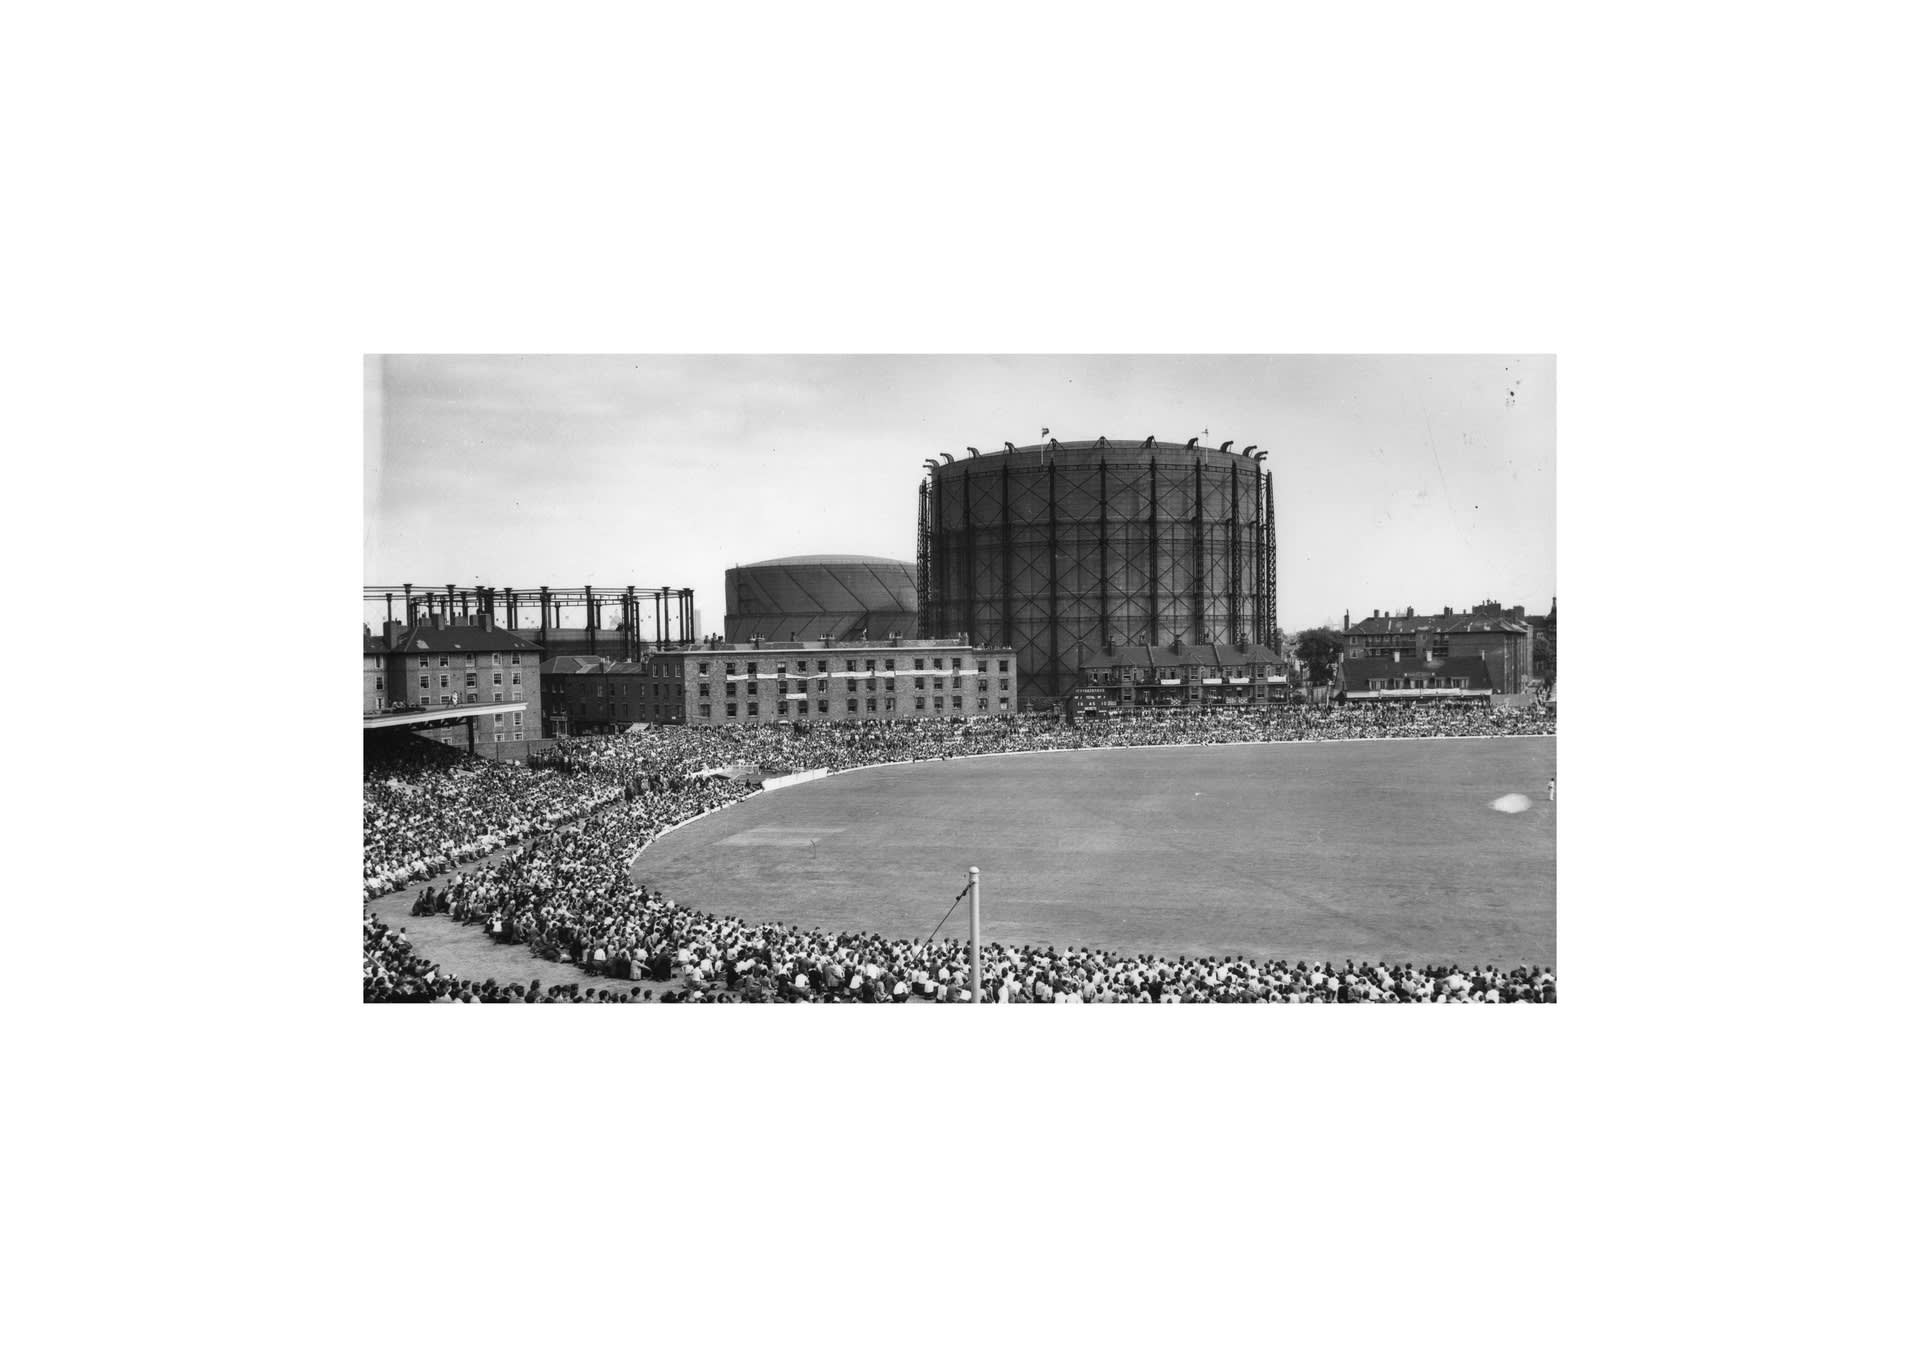 Sports and Urban Spectatorship: The surrounding buildings become the viewing stands to overlook Oval Cricket Ground, London